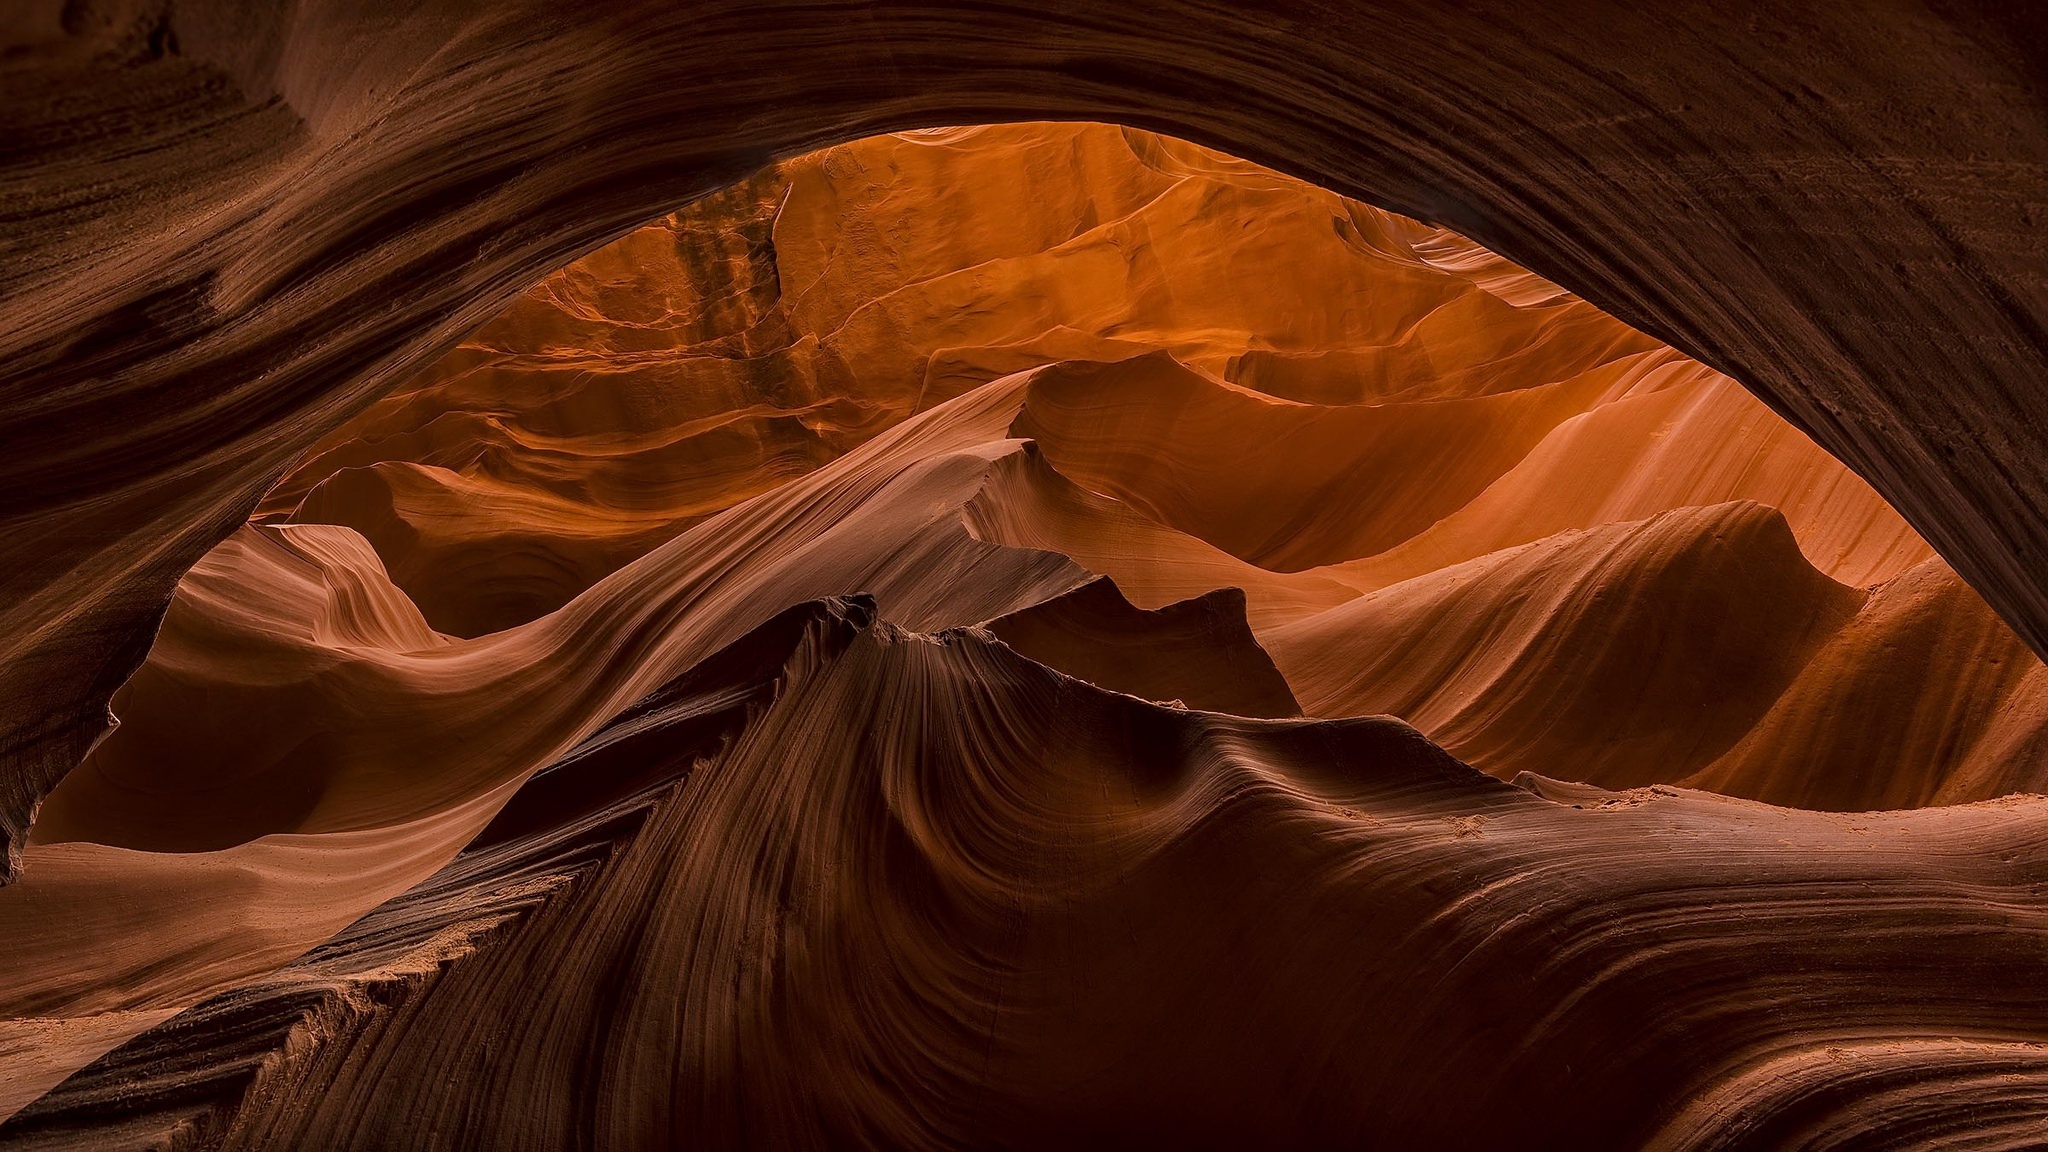 Antelope Canyon beauty, Earth's HD nature, Stunning wallpapers, Breathtaking images, 2050x1160 HD Desktop